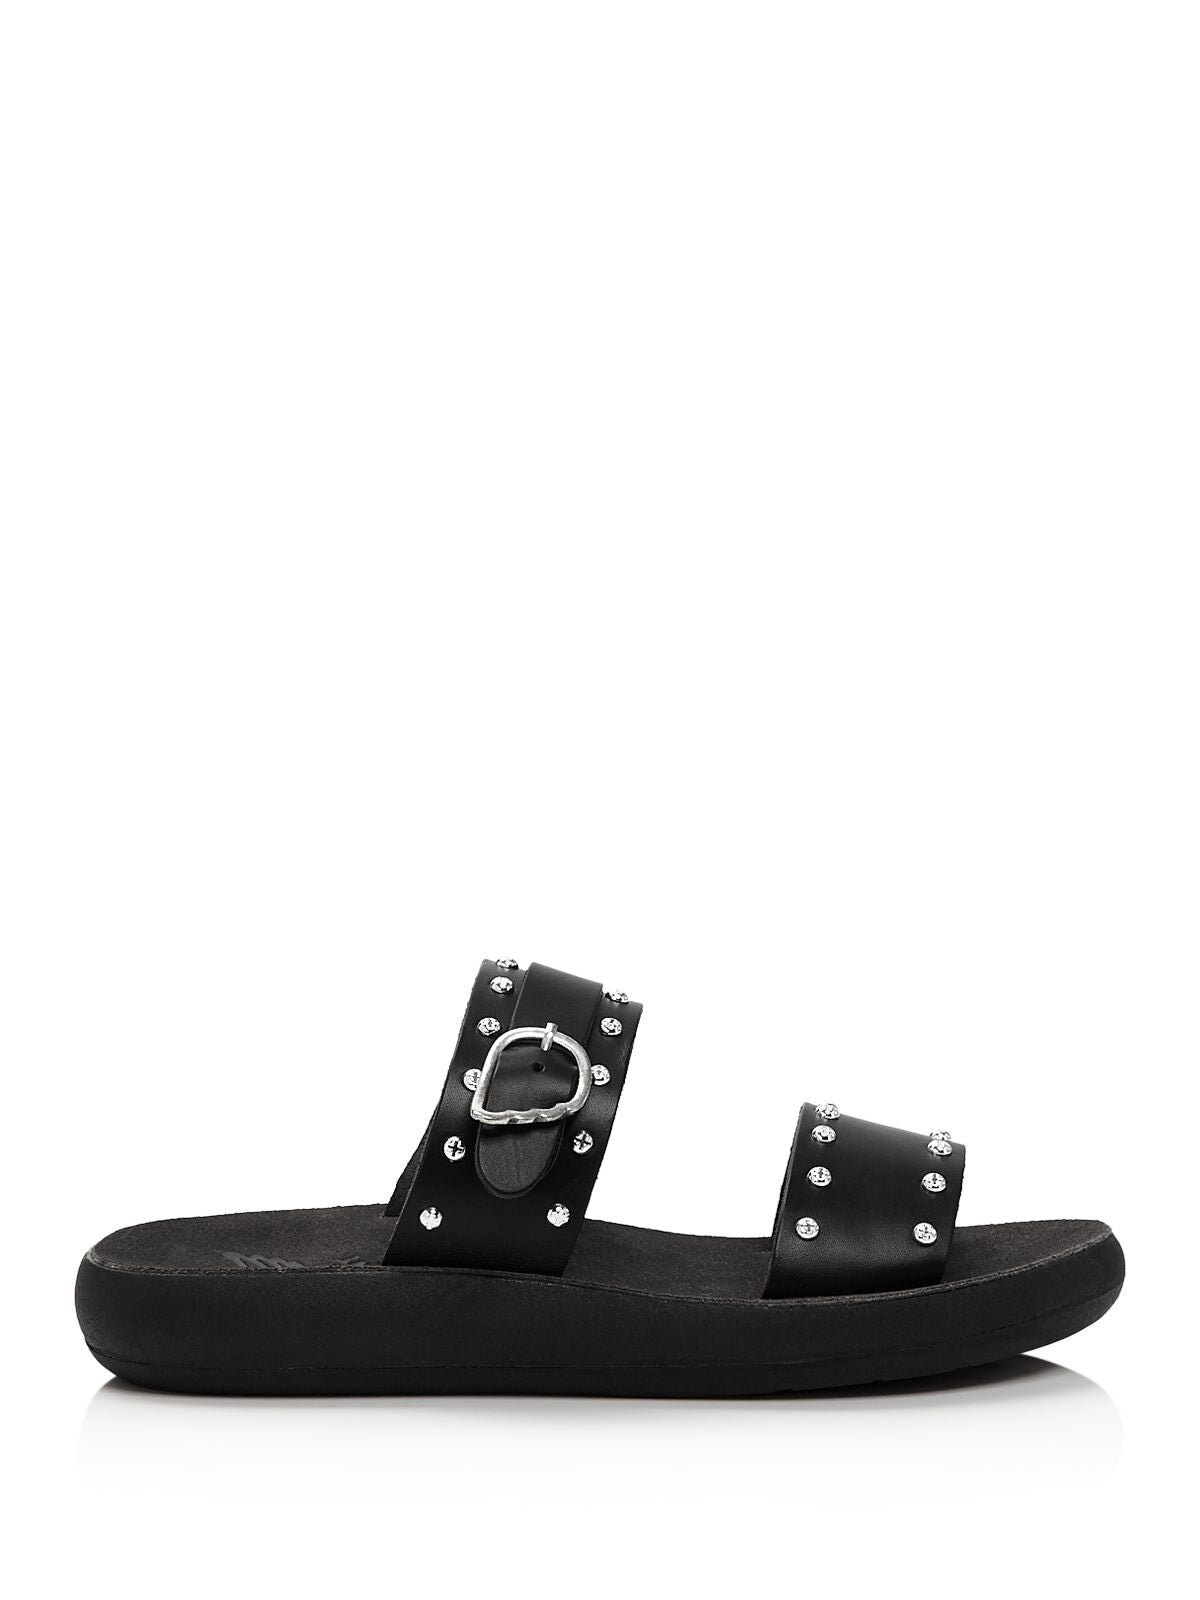 ANCIENT GREEK SANDALS Womens Black Buckle Accent Studded Preveza Round Toe Wedge Slip On Leather Slide Sandals Shoes 41